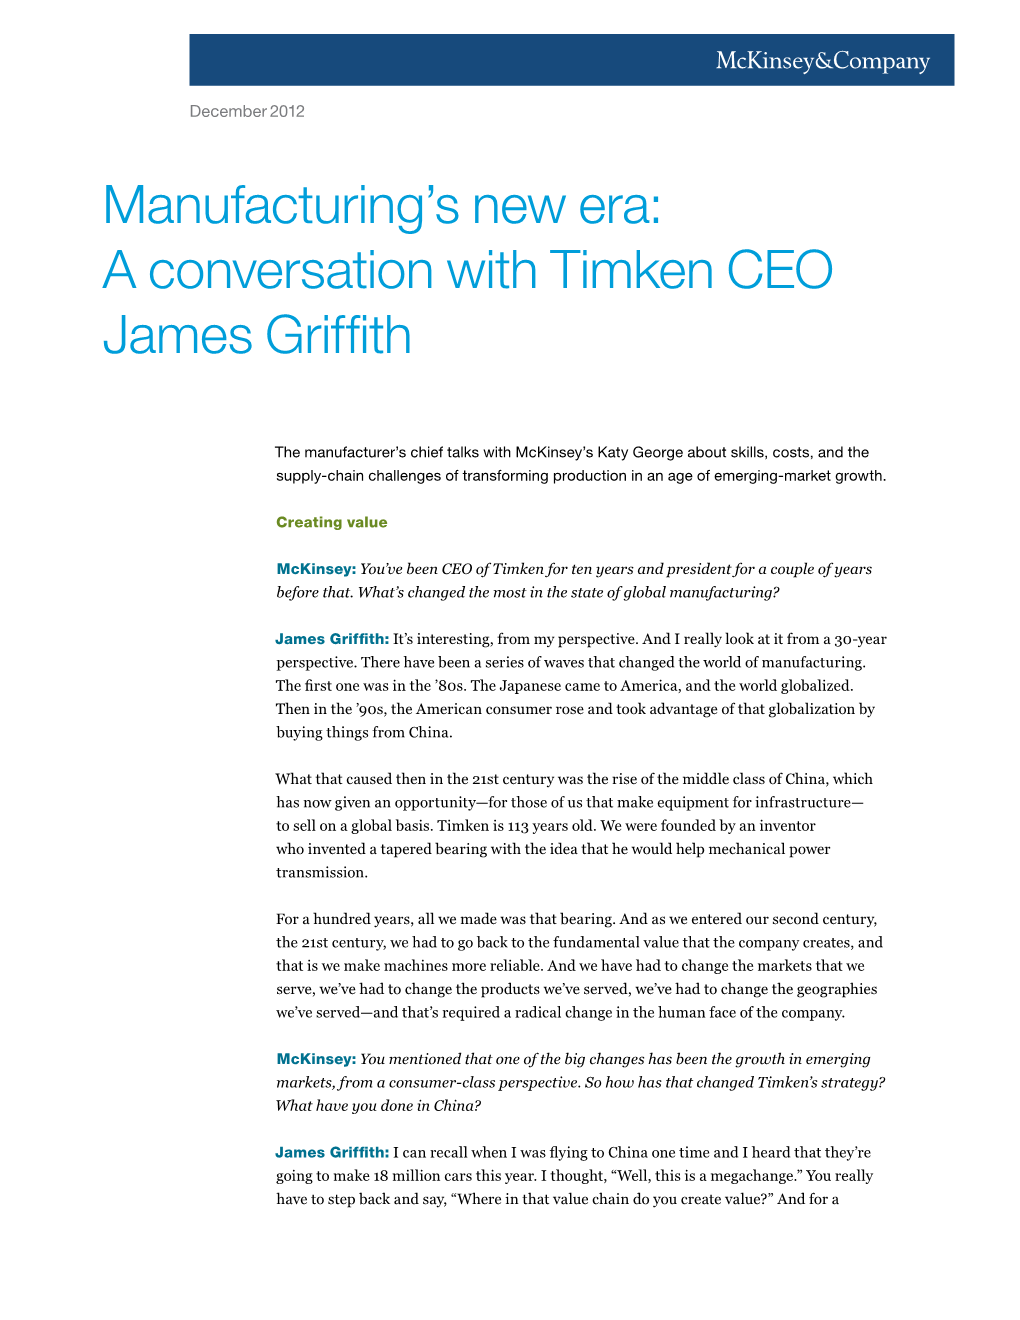 Manufacturing's New Era: a Conversation with Timken CEO